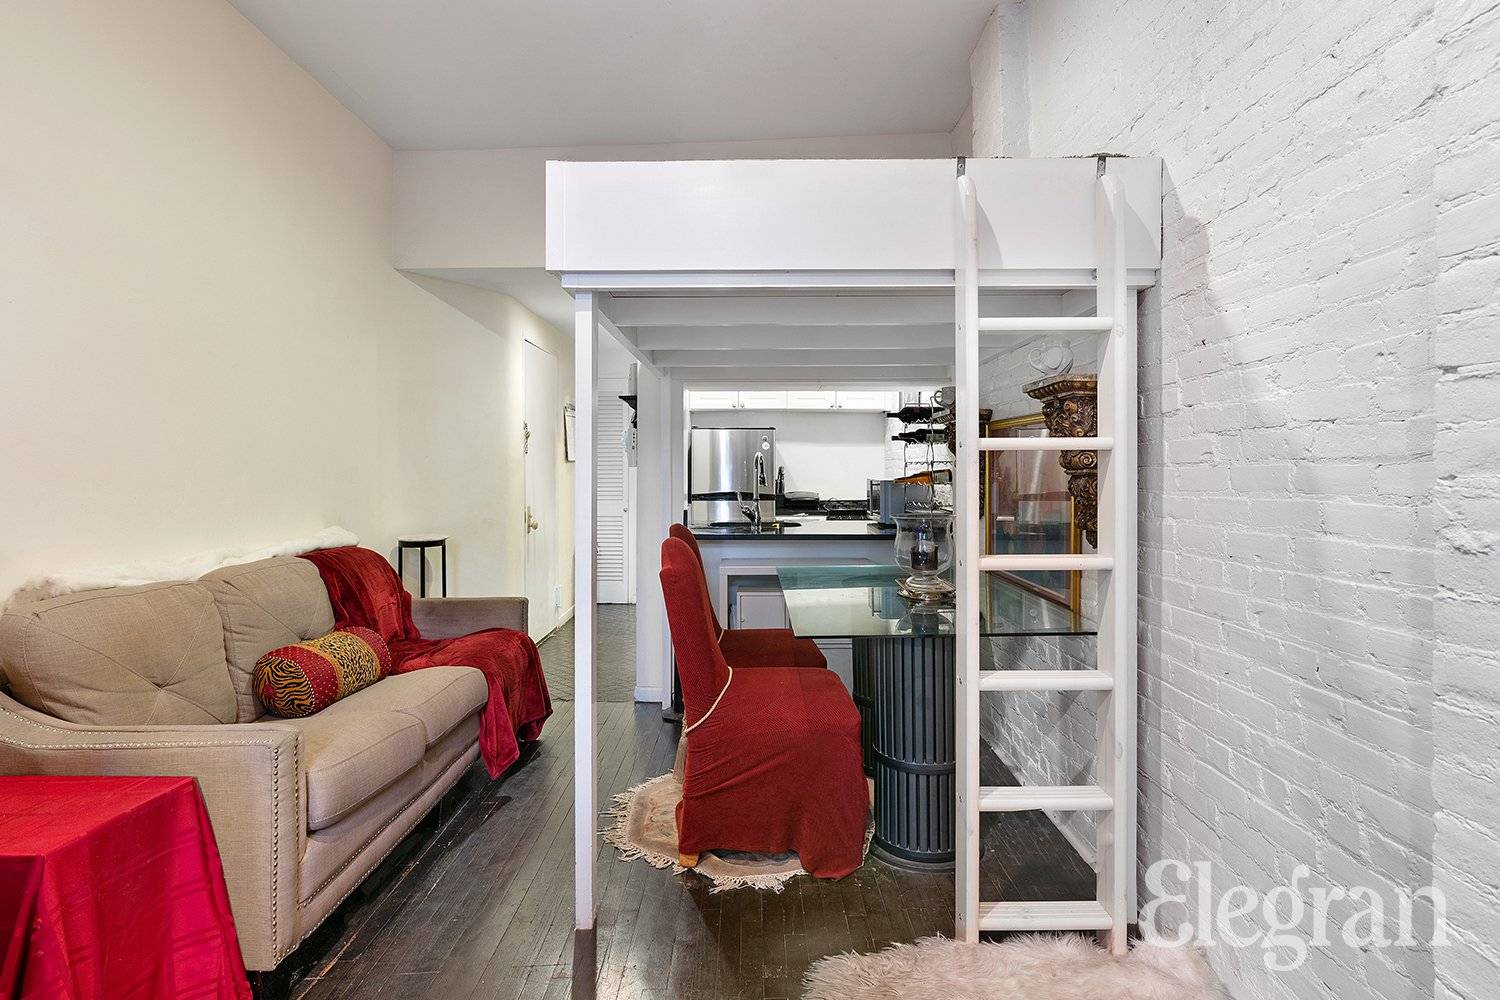 This beautiful apartment offers the very best of city living.